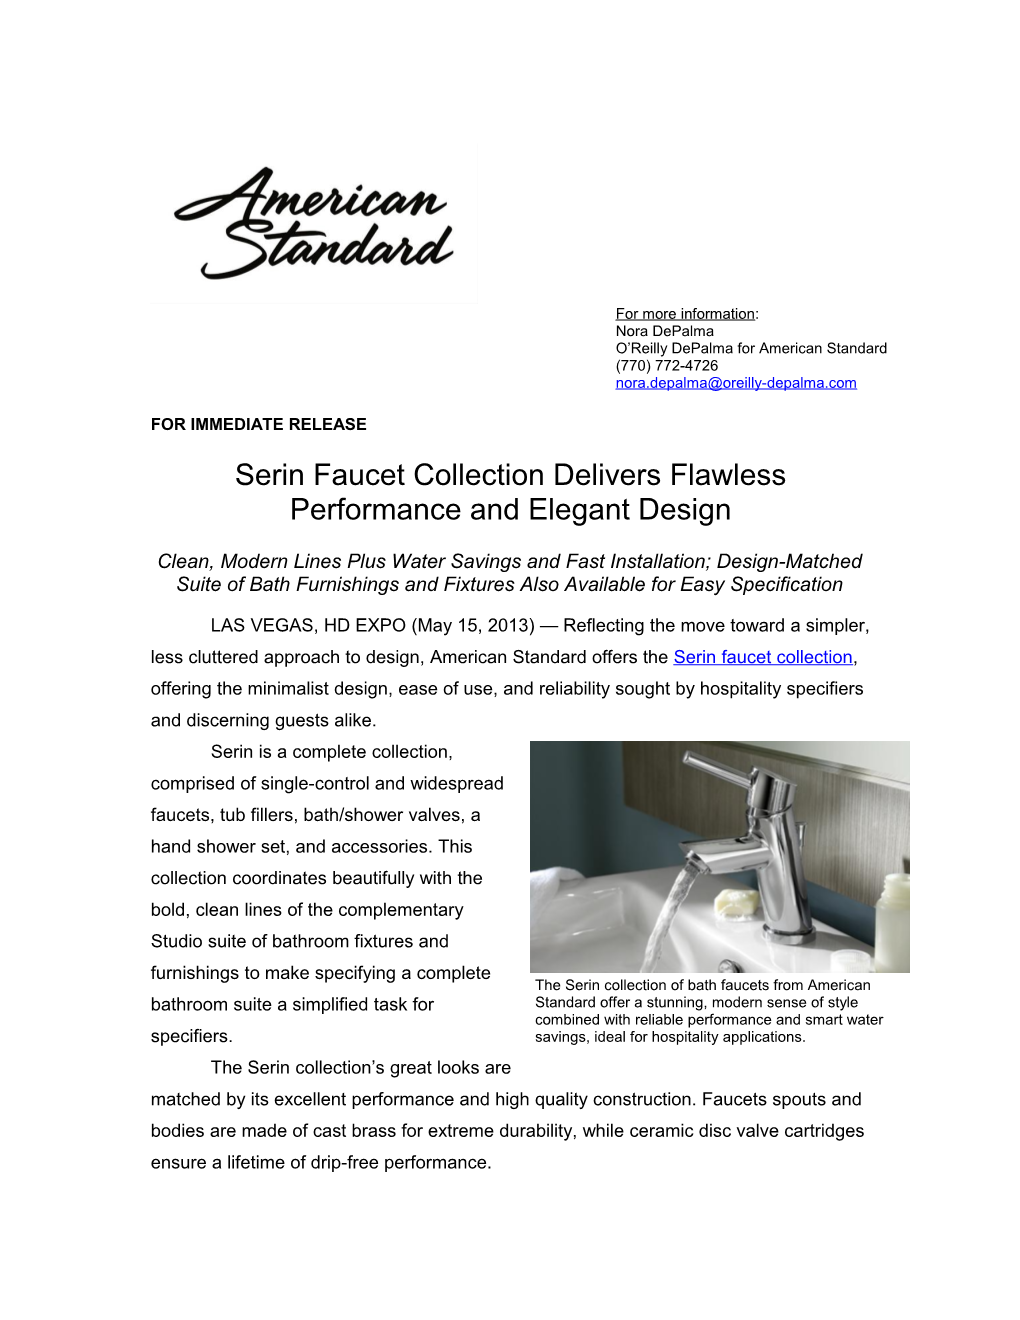 Serin Faucet Collection Delivers Flawless Performance and Elegant Design 3-3-3